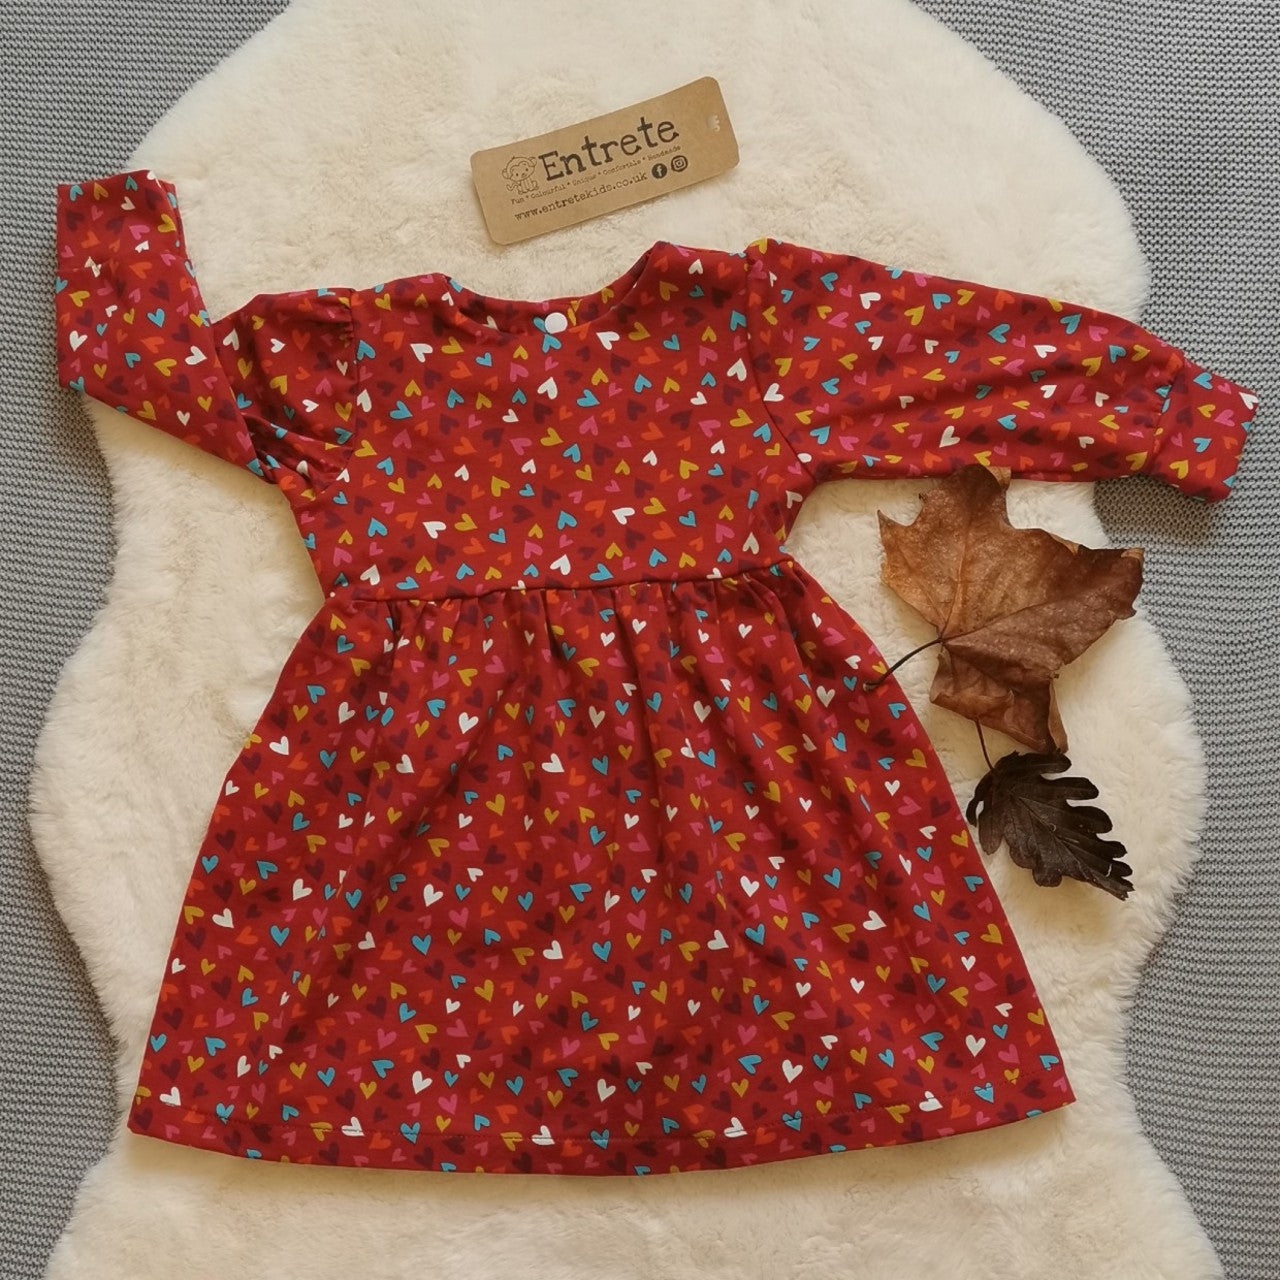 Front view of the autumnal red min hearts dress. Lovingly handmade from soft and comfortable red mini hearts cotton jersey